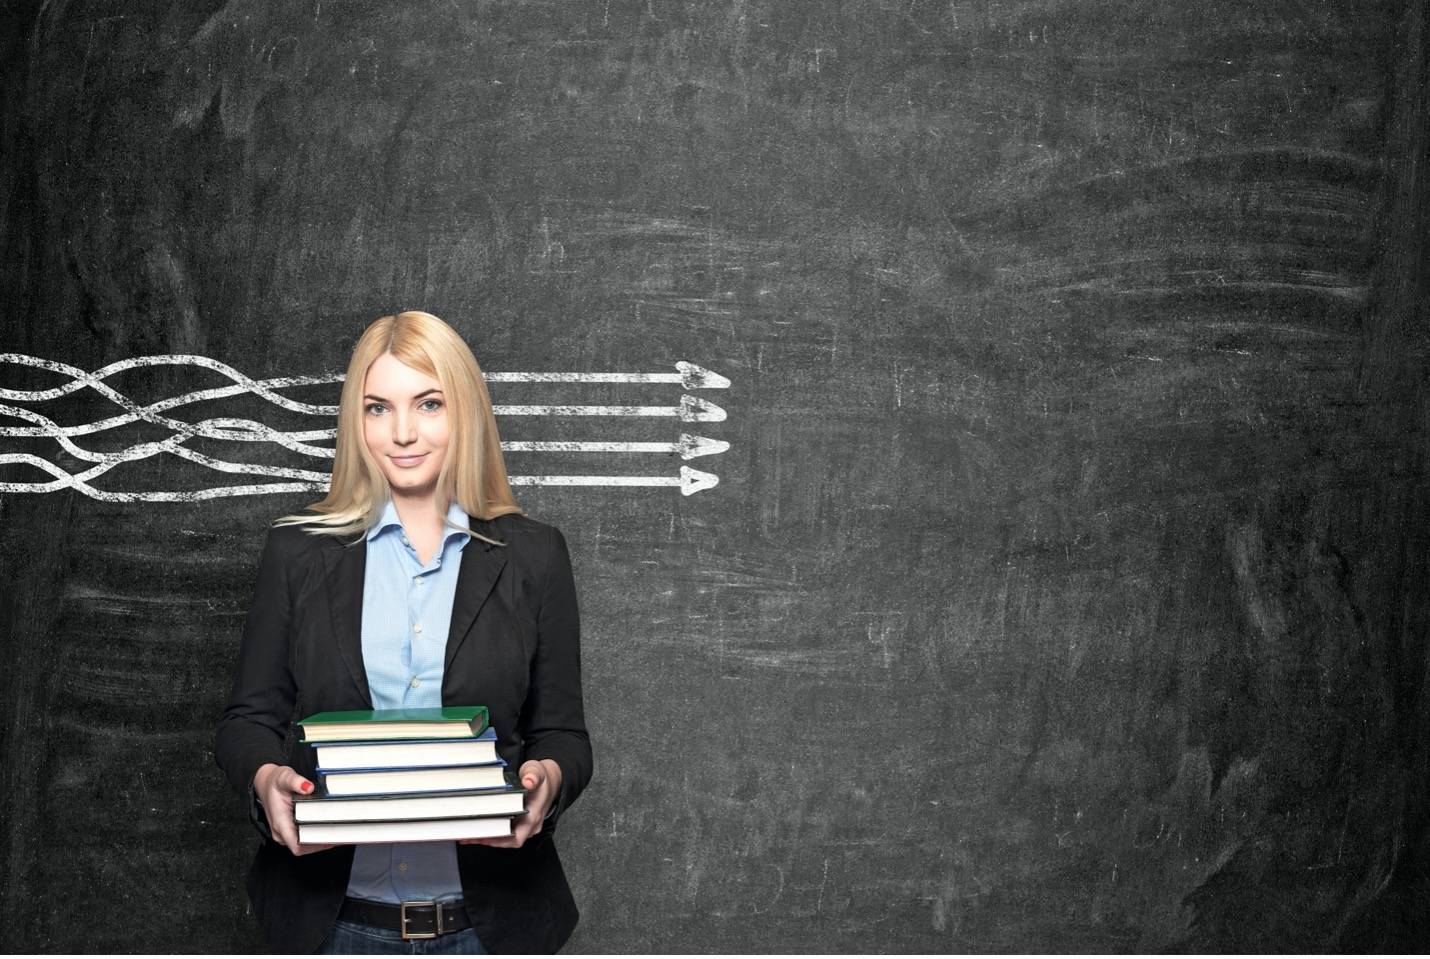 A woman standing in front of a chalkboard with parallel lines drawn behind her